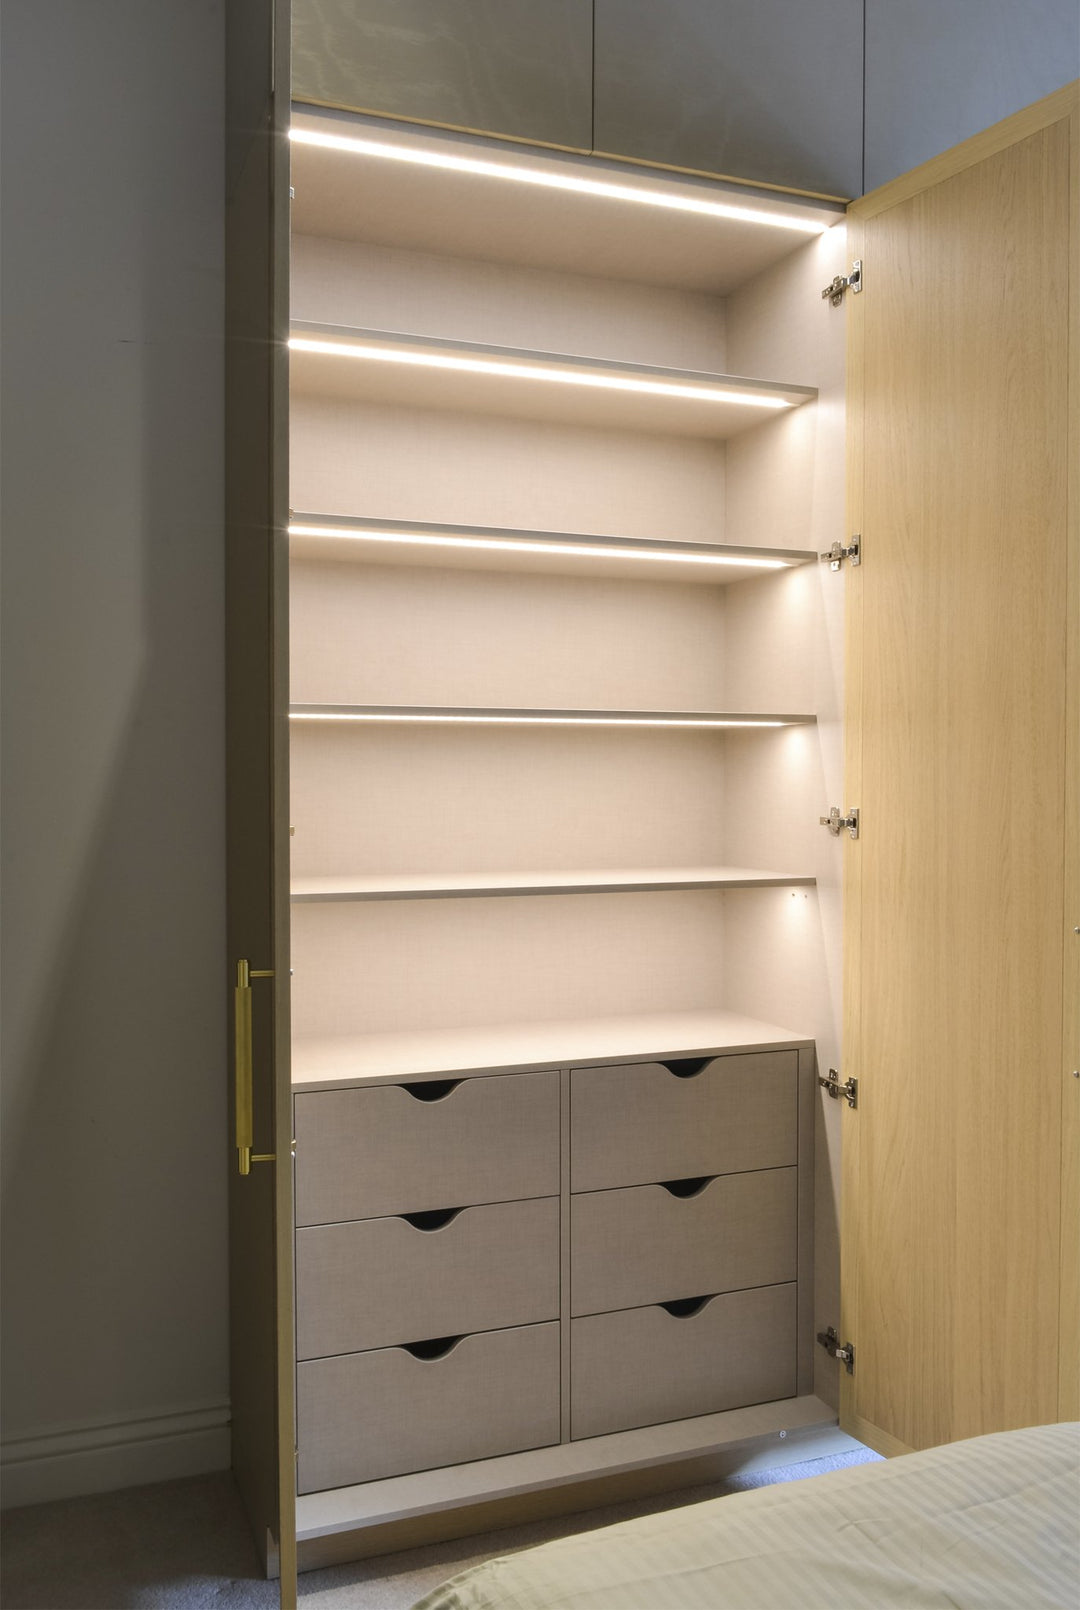 Bespoke Makeup Unit with Wardrobe Space - Wardrobe Interior - Fitted Wardrobe. Built-in dressing table. Design, manufacture and installation service. Wardrobe doors include inset clear mirror with bevelled edges. Wardrobe door frames made from Oak veneere